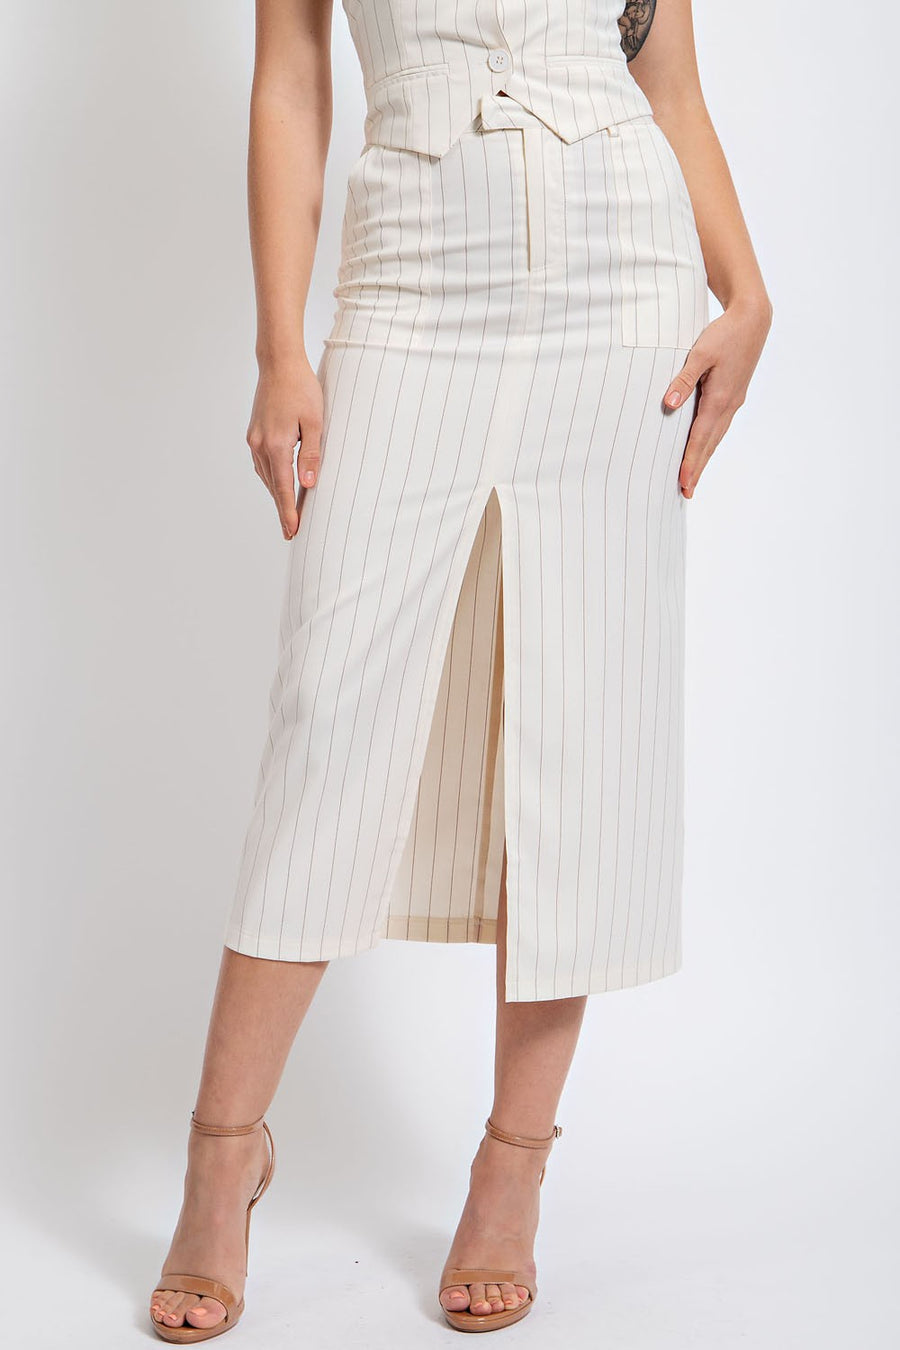 Ivory midi skirt with a front slit. 